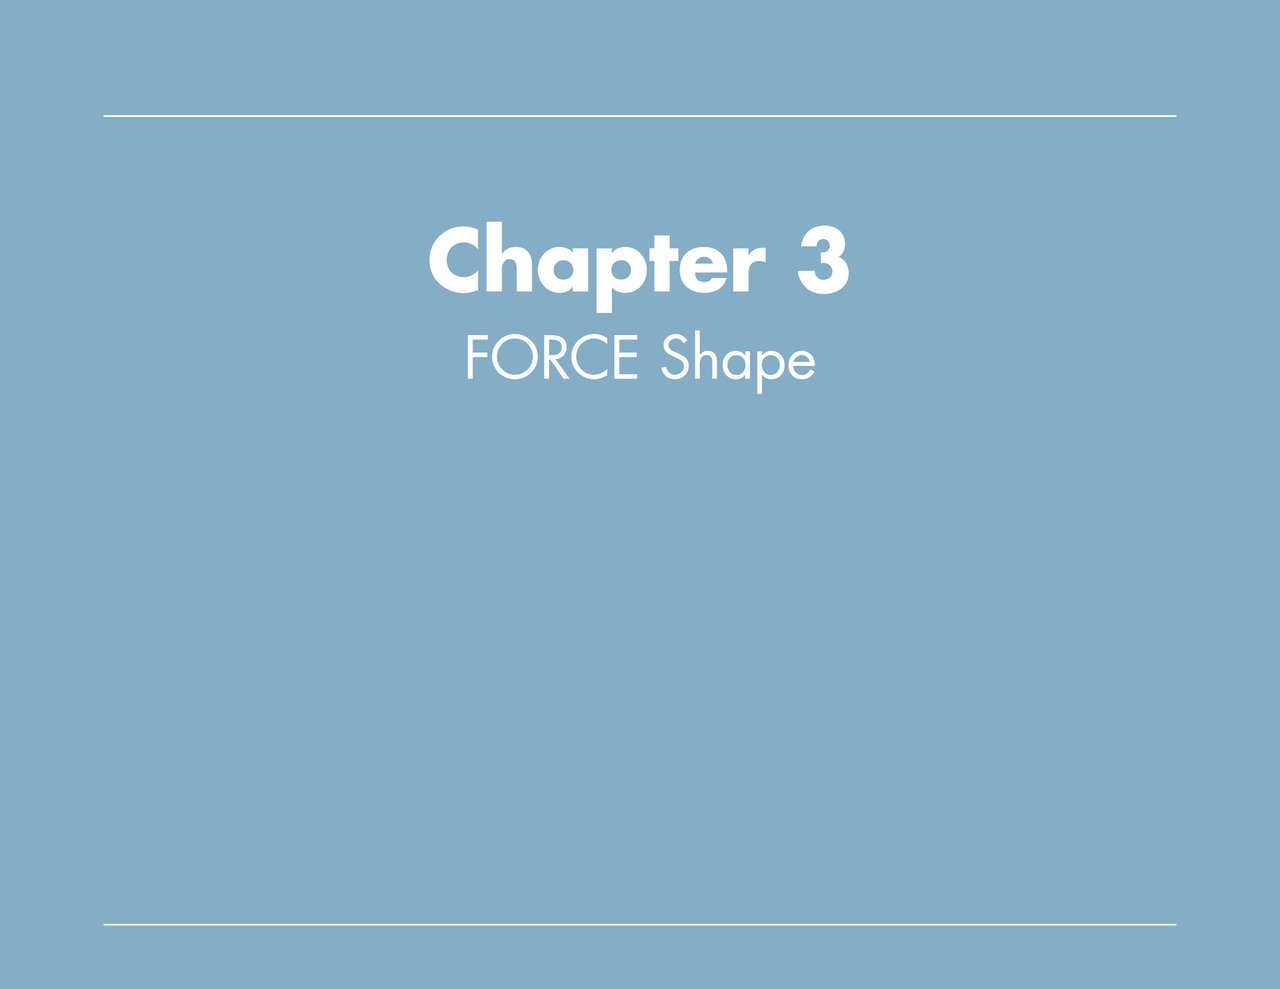 The Force companion_ quick tips and tricks-CRC Press (2019) - Michael D. Mattesi [Digital] 178